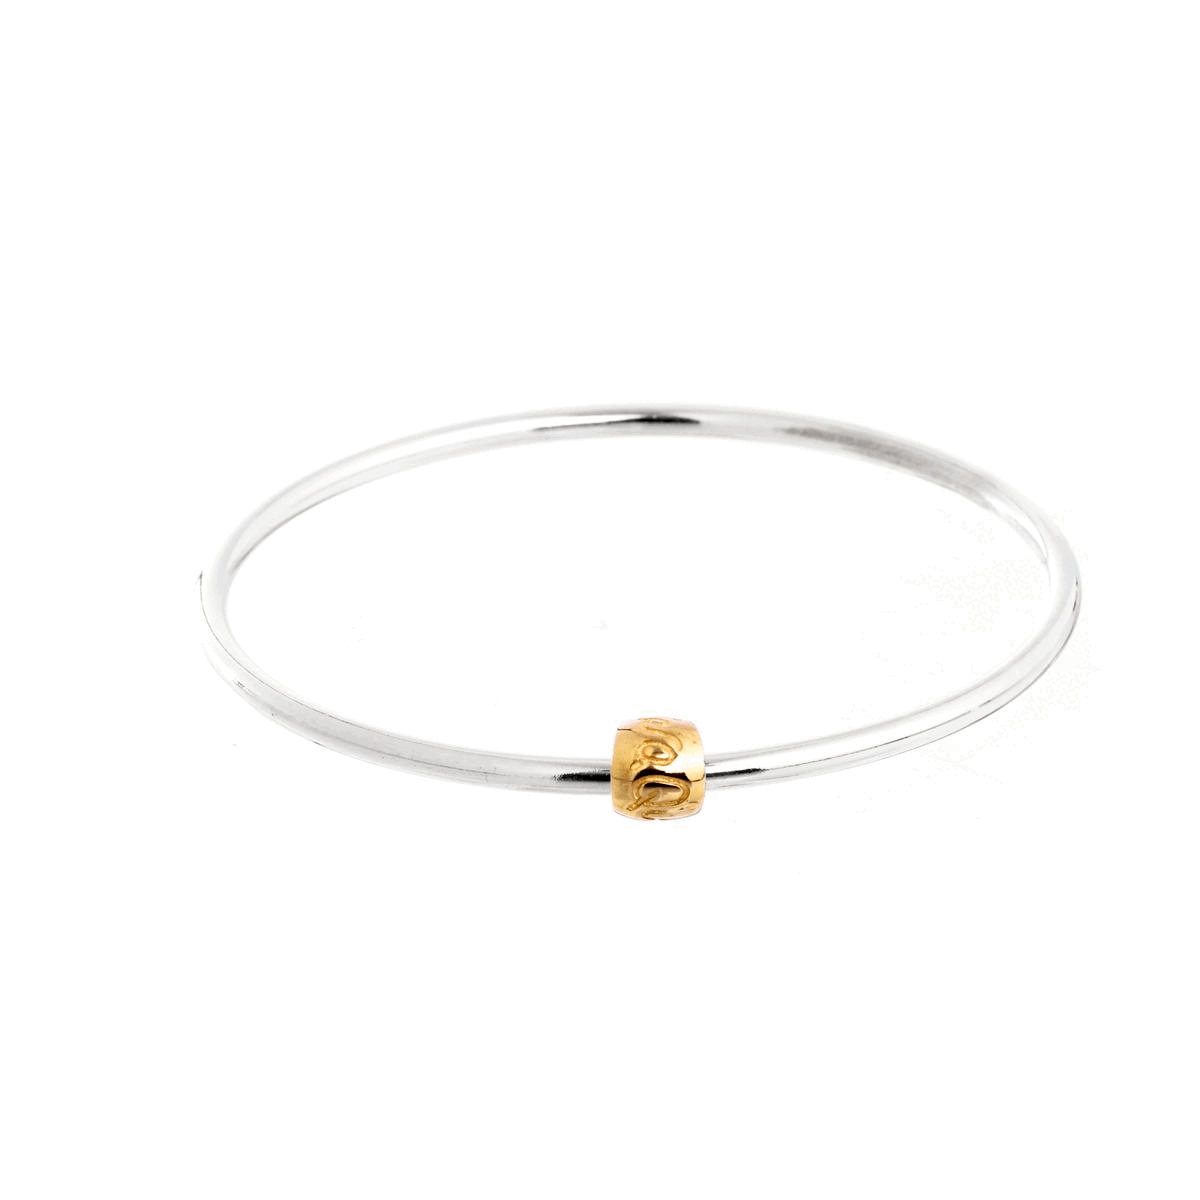 silver and recycled gold worry bead que sera bangle bracelet